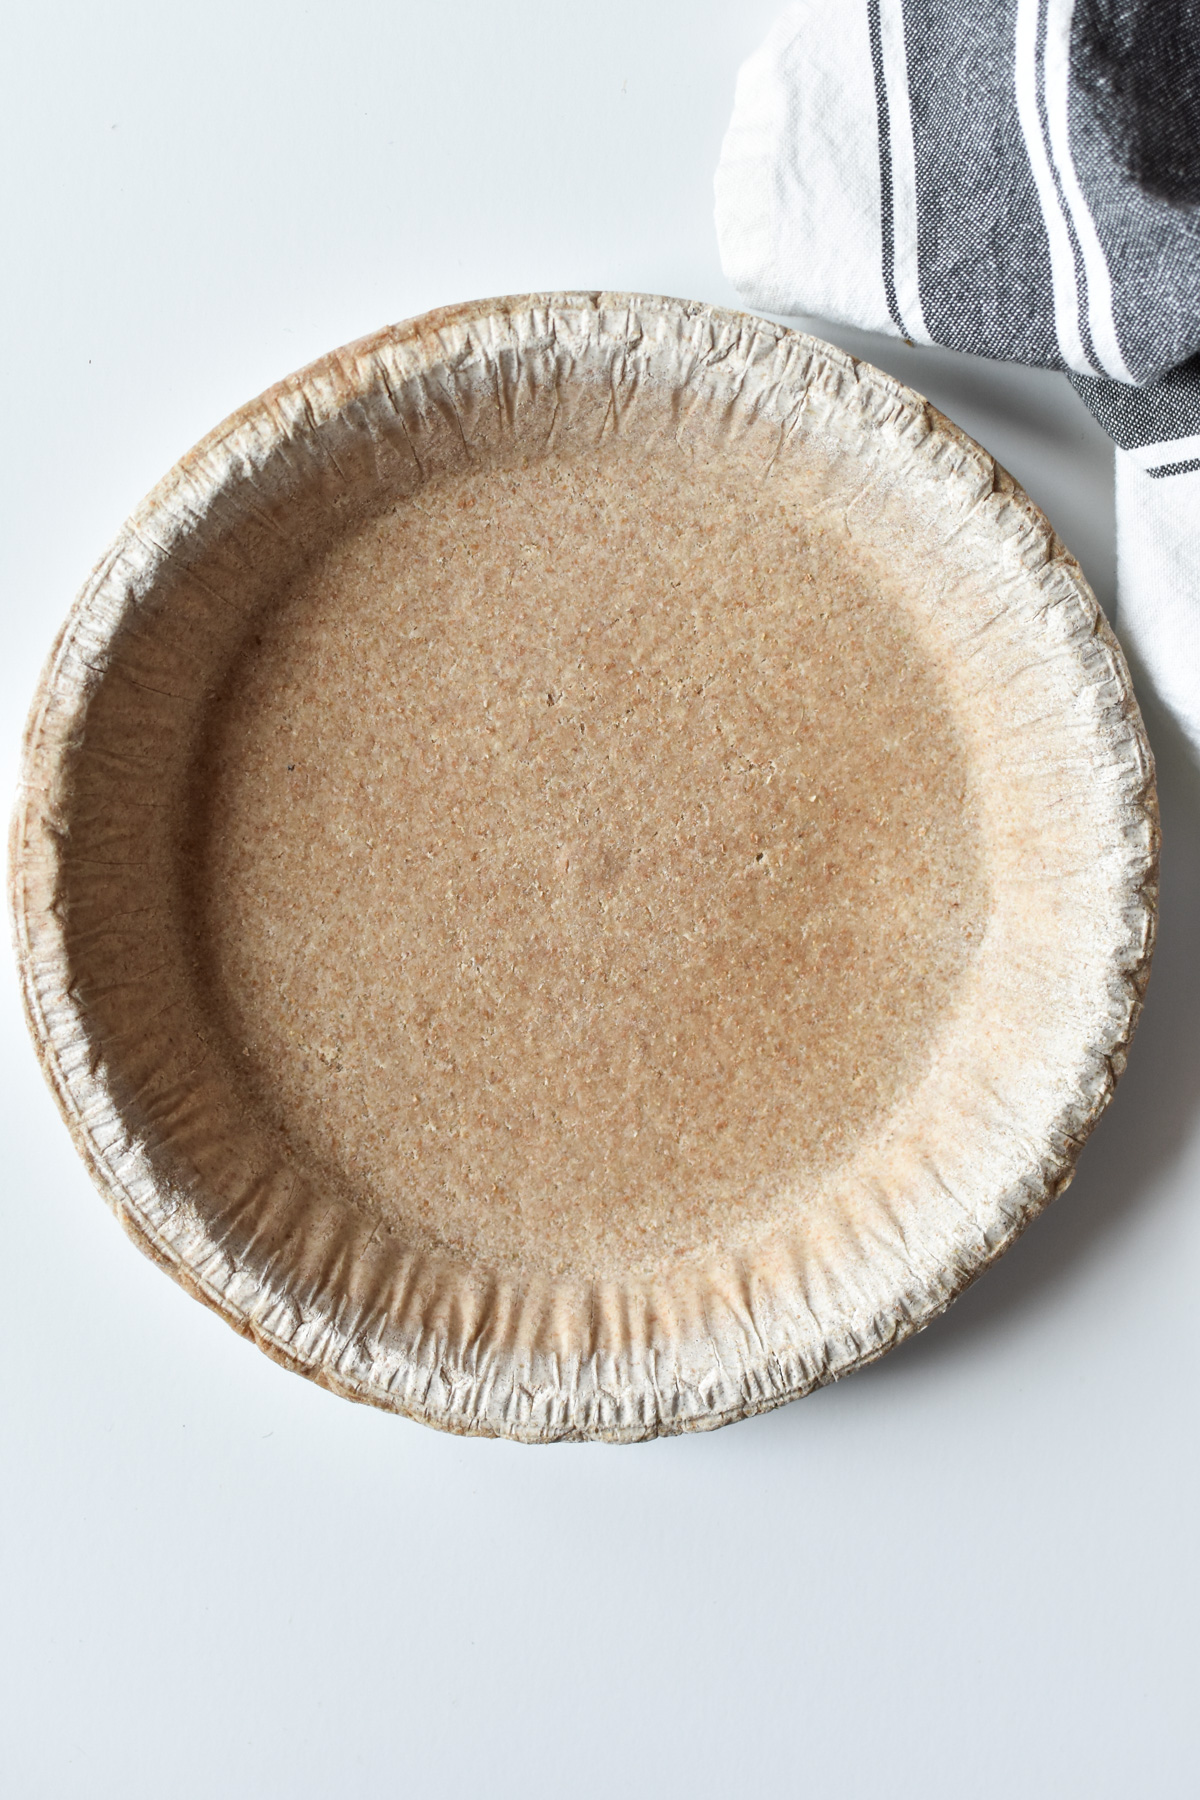 wholly wholesome whole wheat pie crust